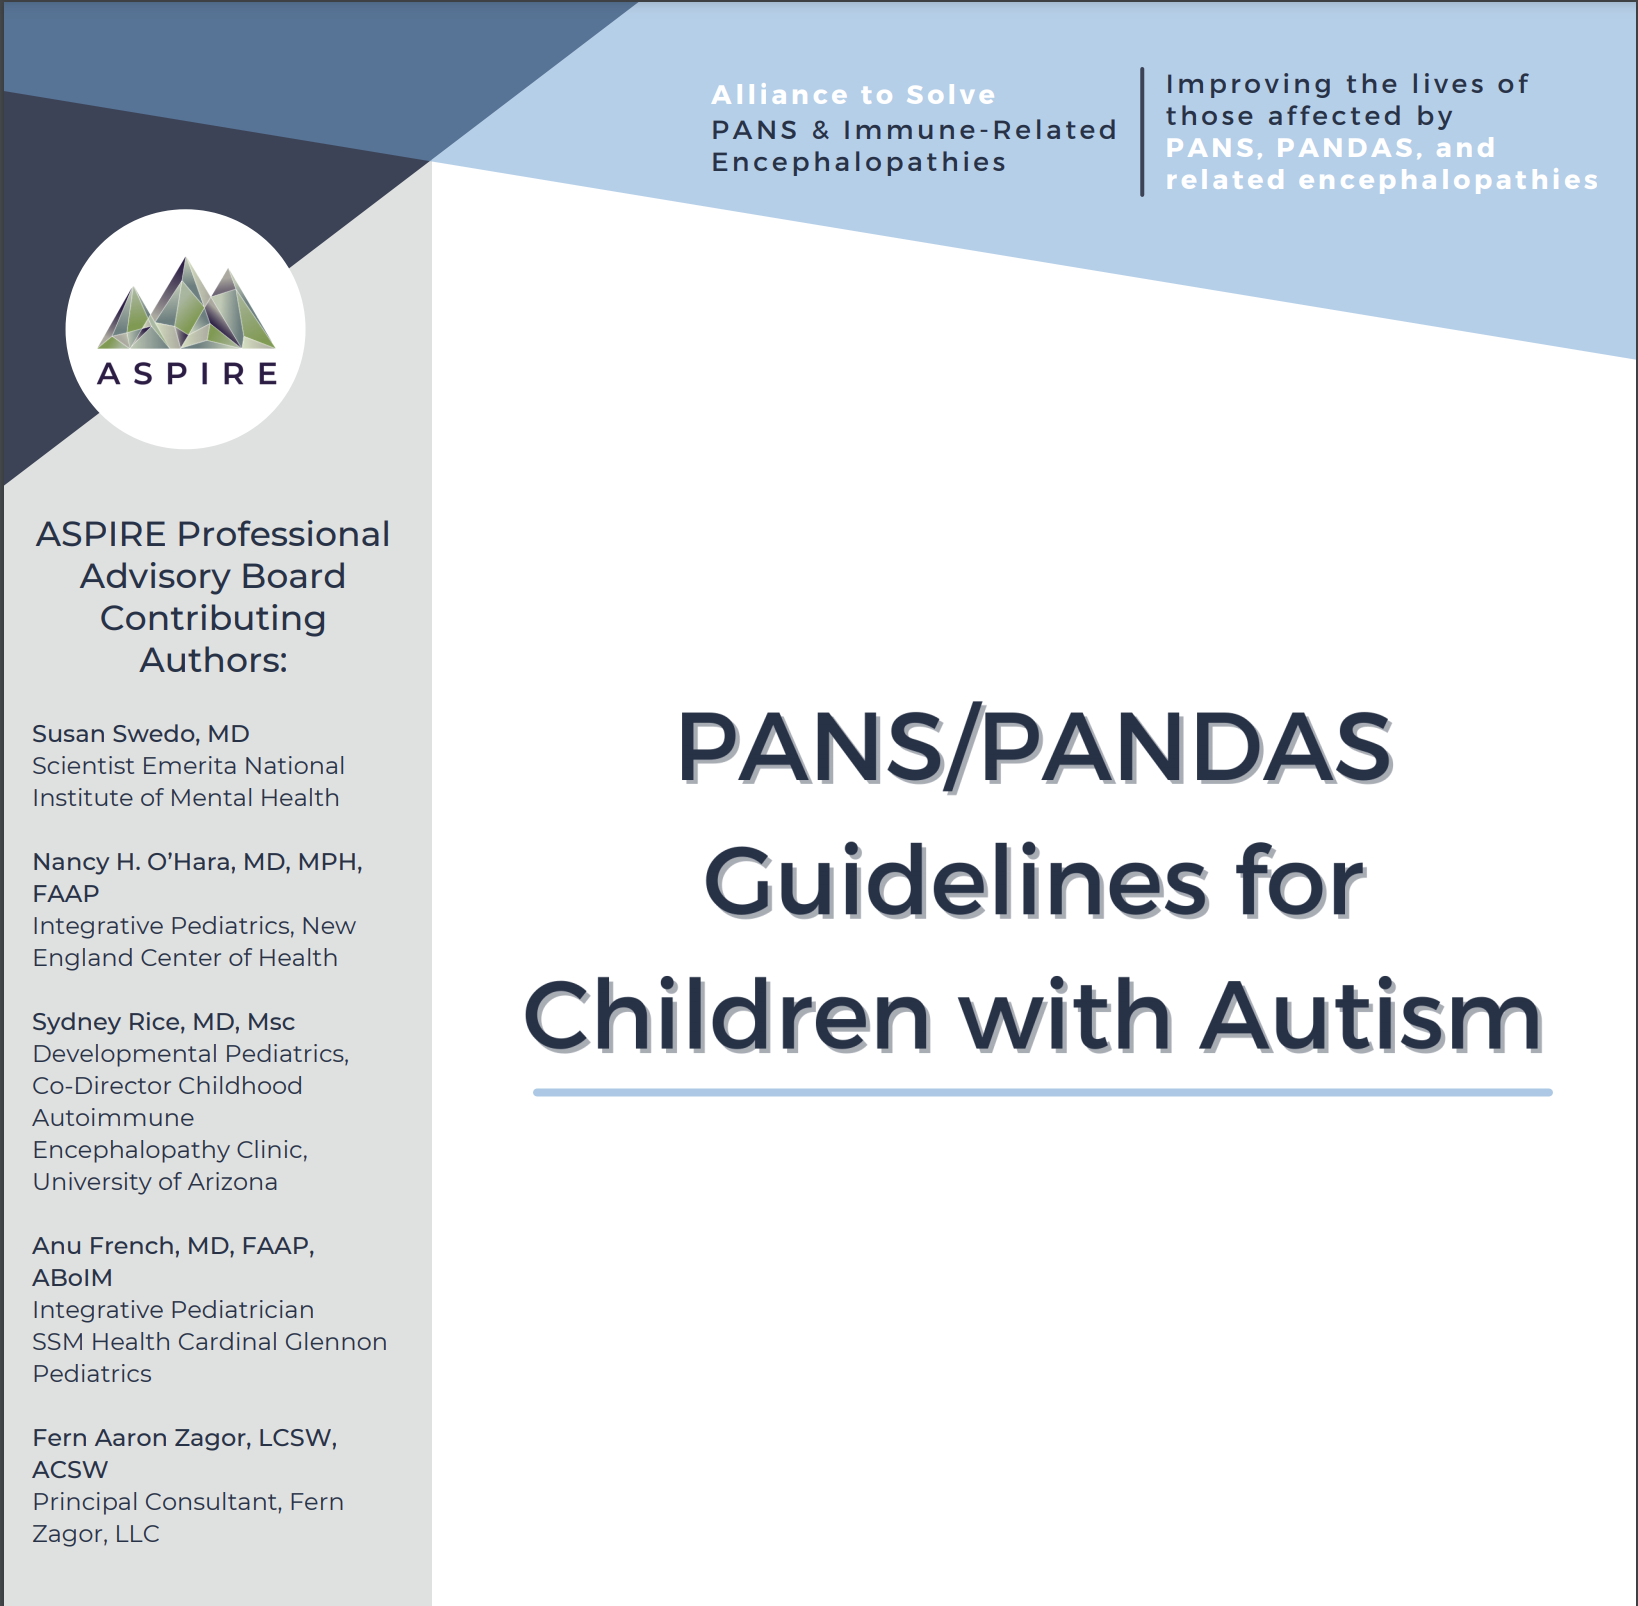 PANS/PANDAS Guidelines for Children With Autism